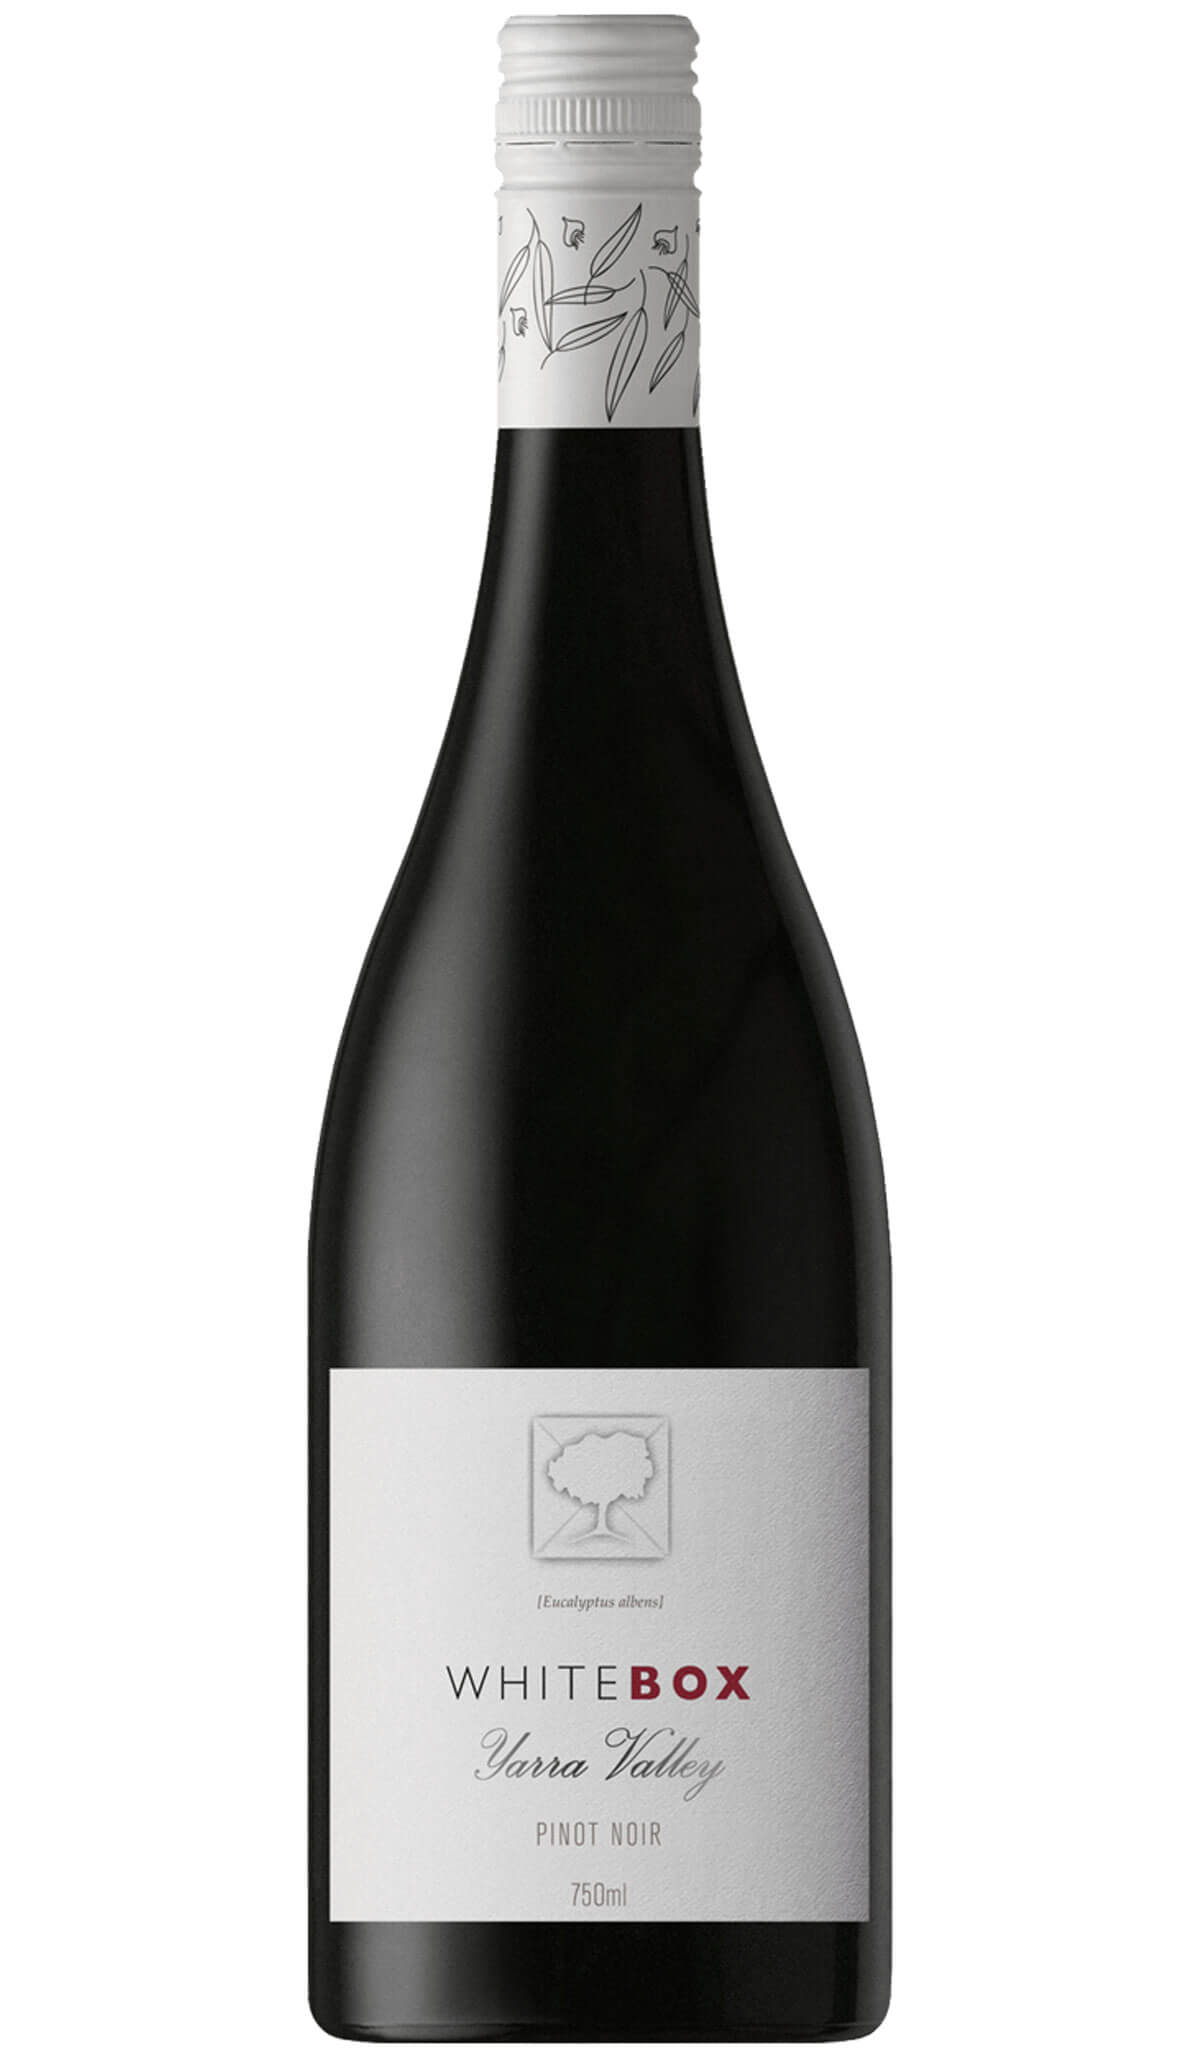 Find out more or buy Whitebox Yarra Valley Pinot Noir 2021 online at Wine Sellers Direct - Australia’s independent liquor specialists.